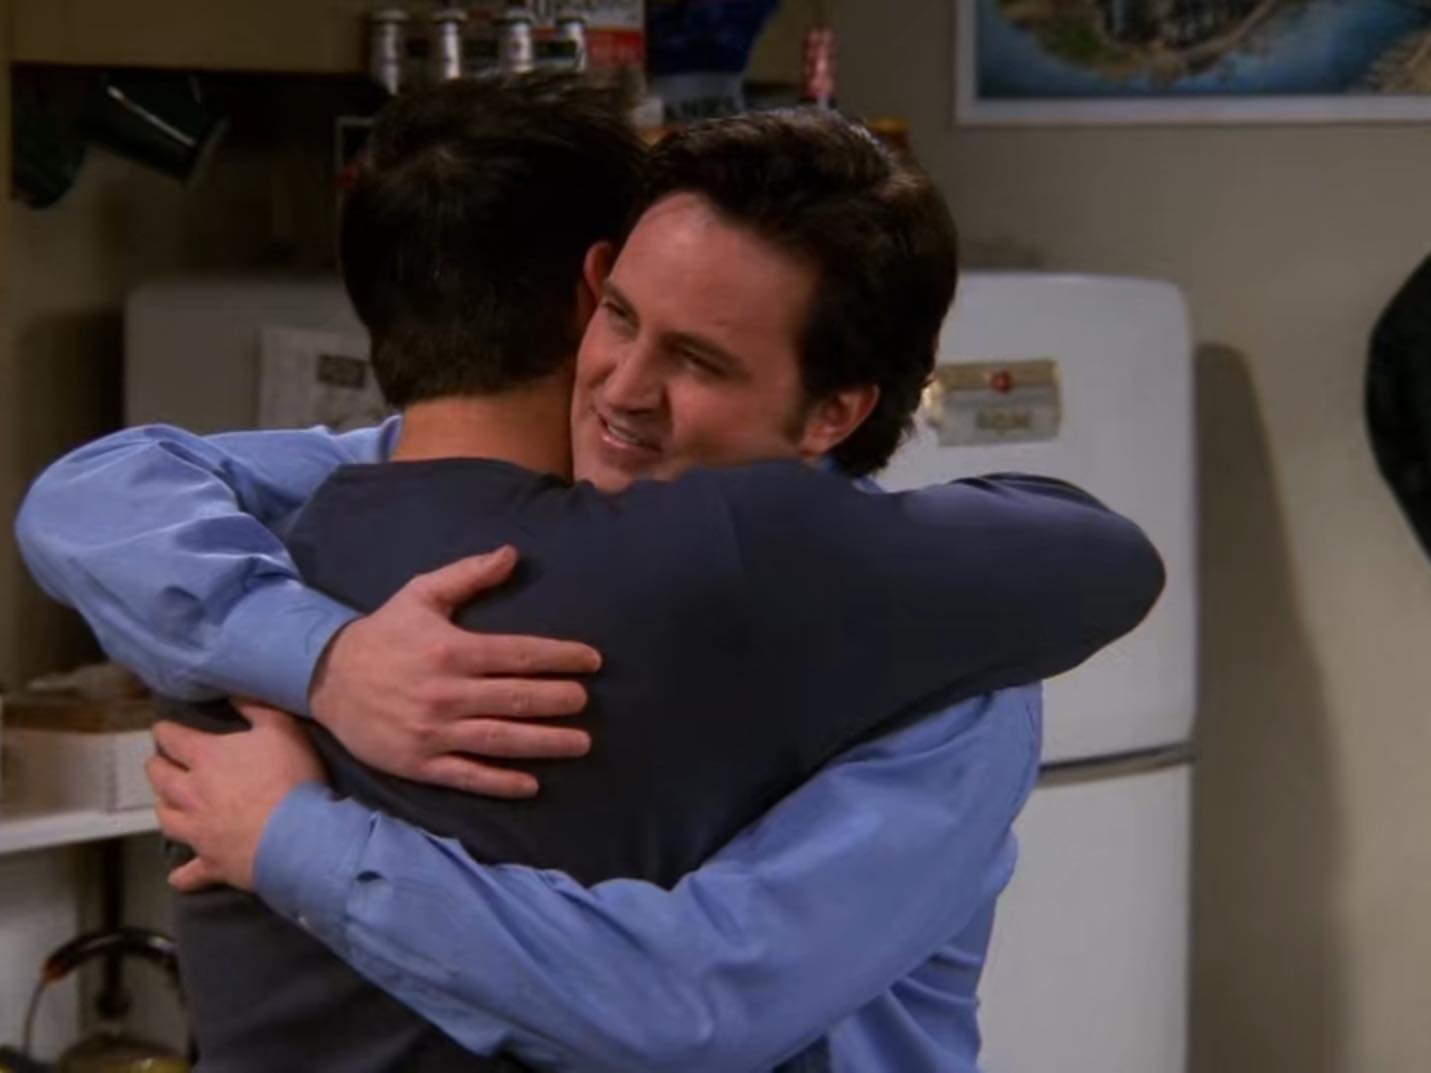 Matt LeBlanc has shared a tribute to his Friends co-star Matthew Perry, who starred as roommates Joey and Chandler